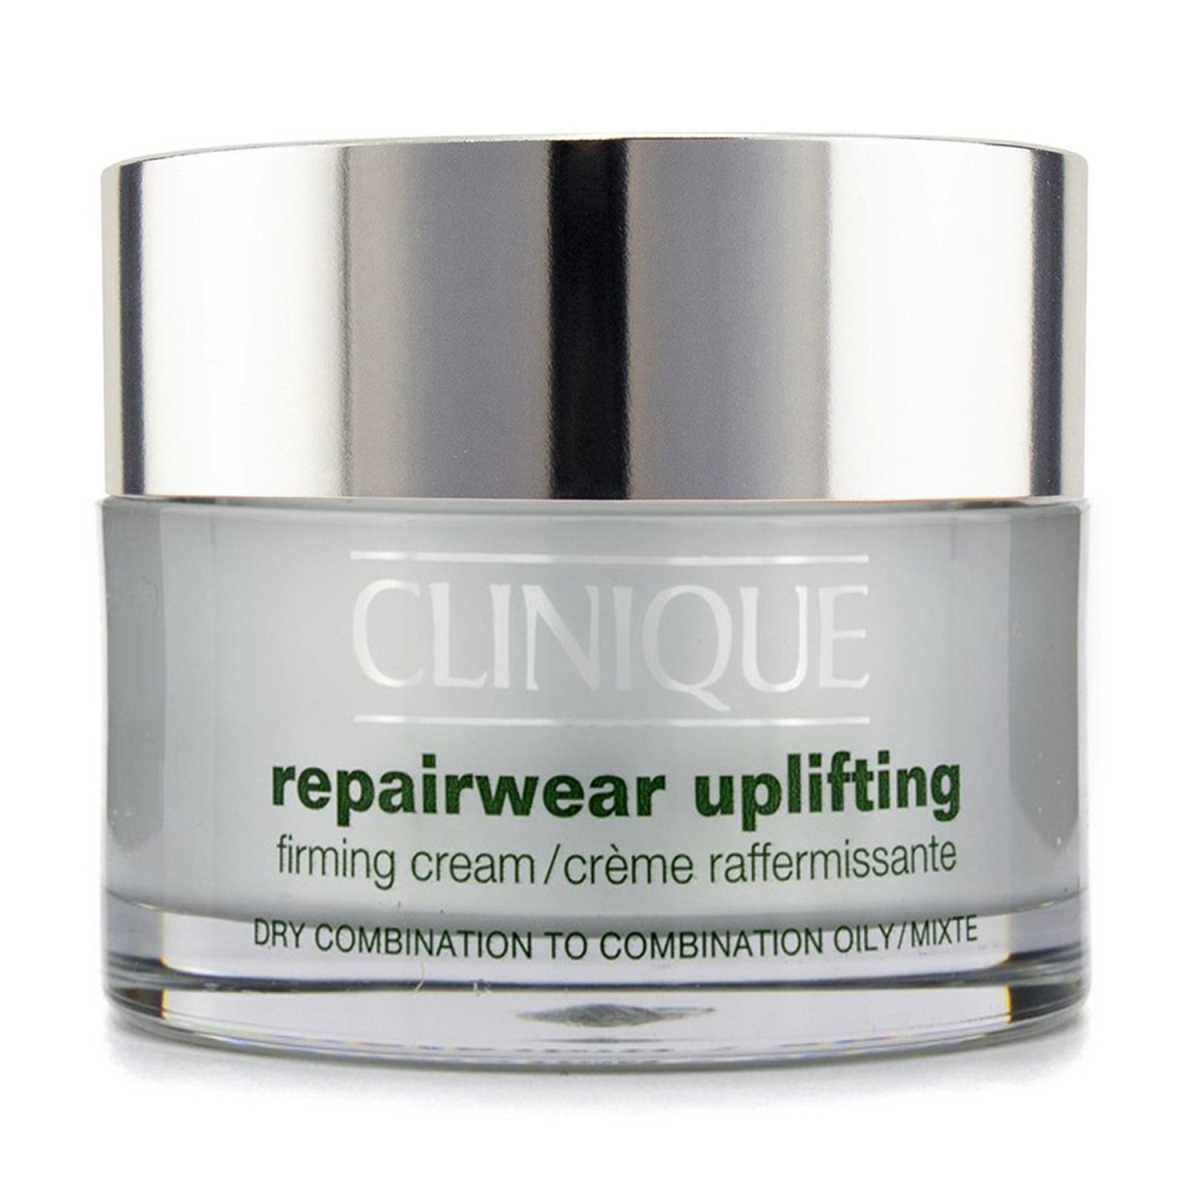 139757 1.7 oz Repairwear Uplifting Firming Cream for Dry Combination to Combination Oily -  Clinique